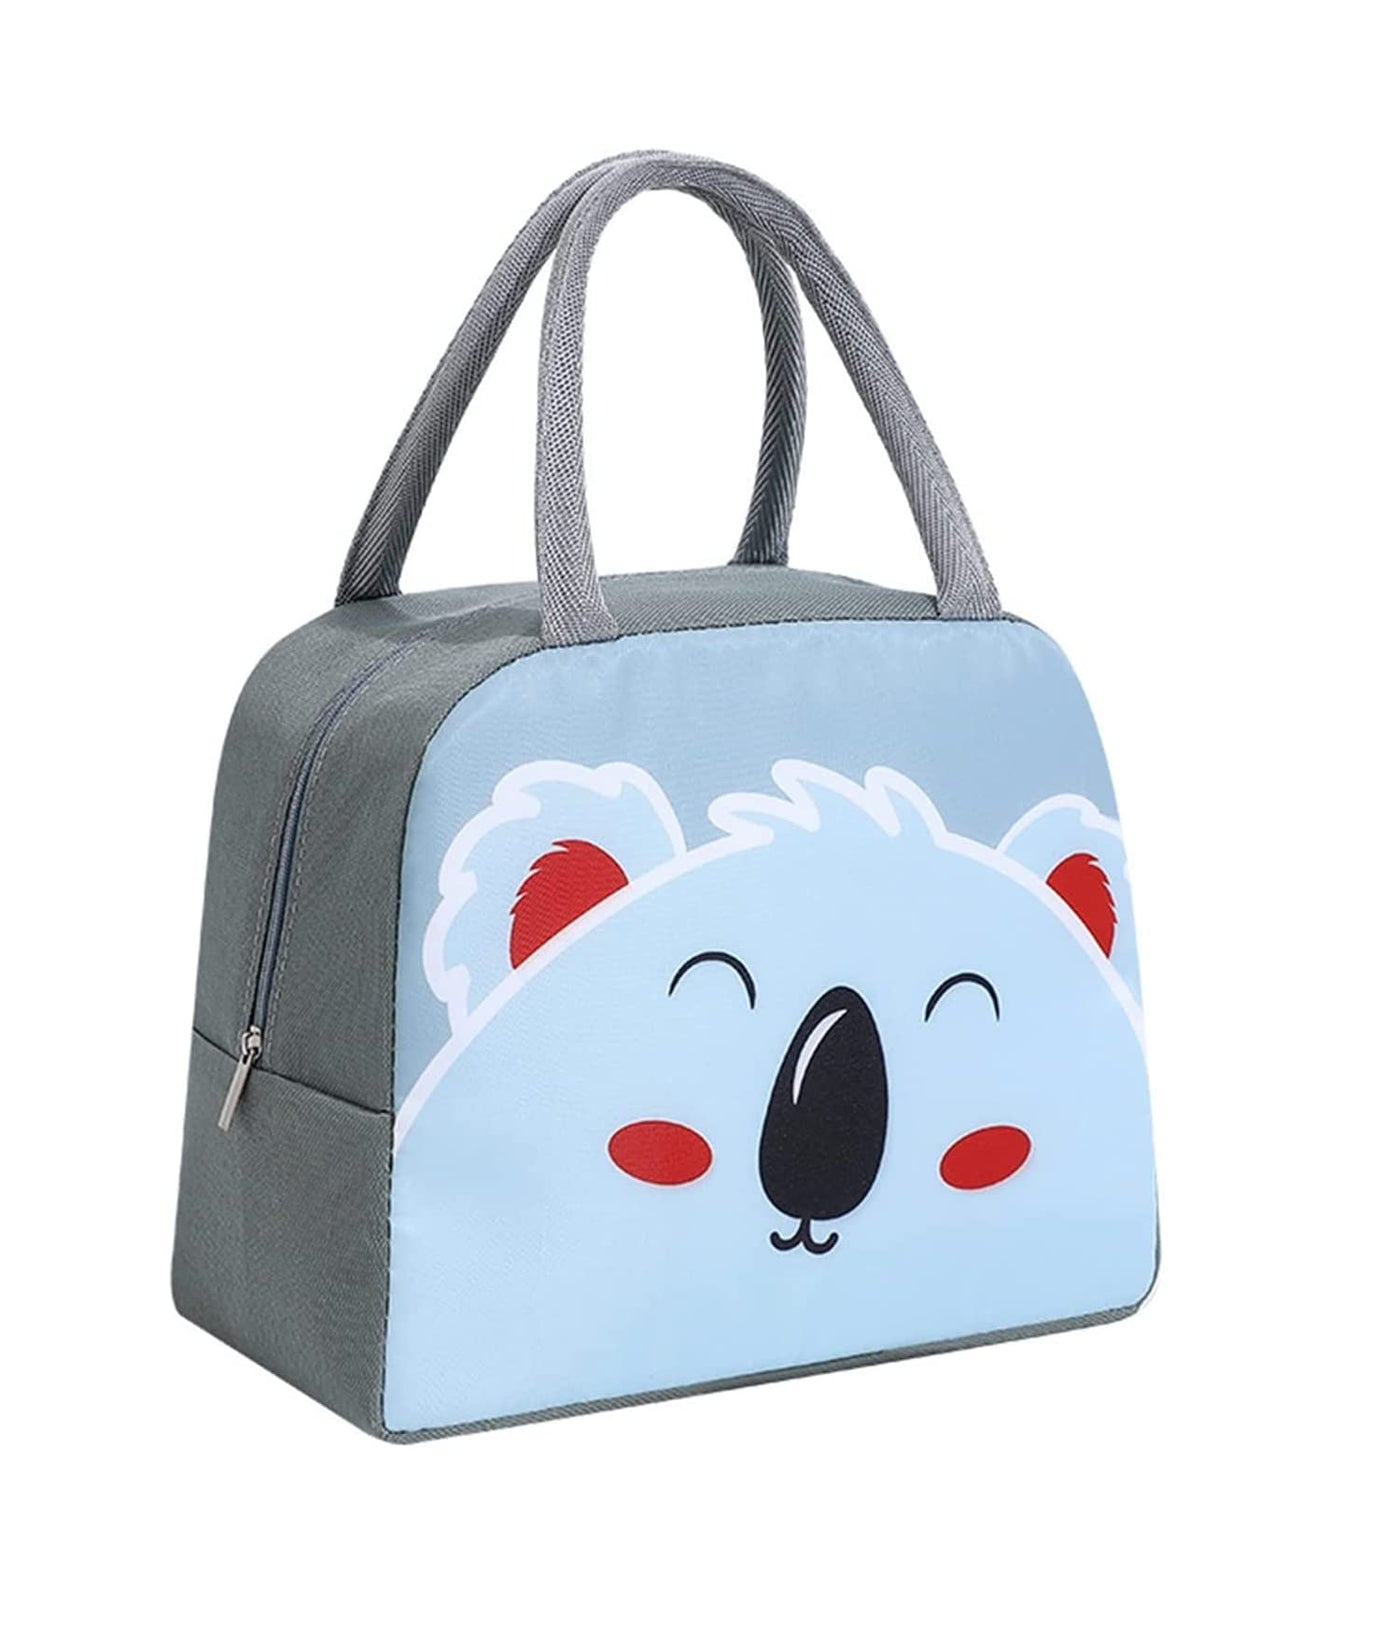 Kids Printed Insulated Reusable Lunch Bag Tote Bag